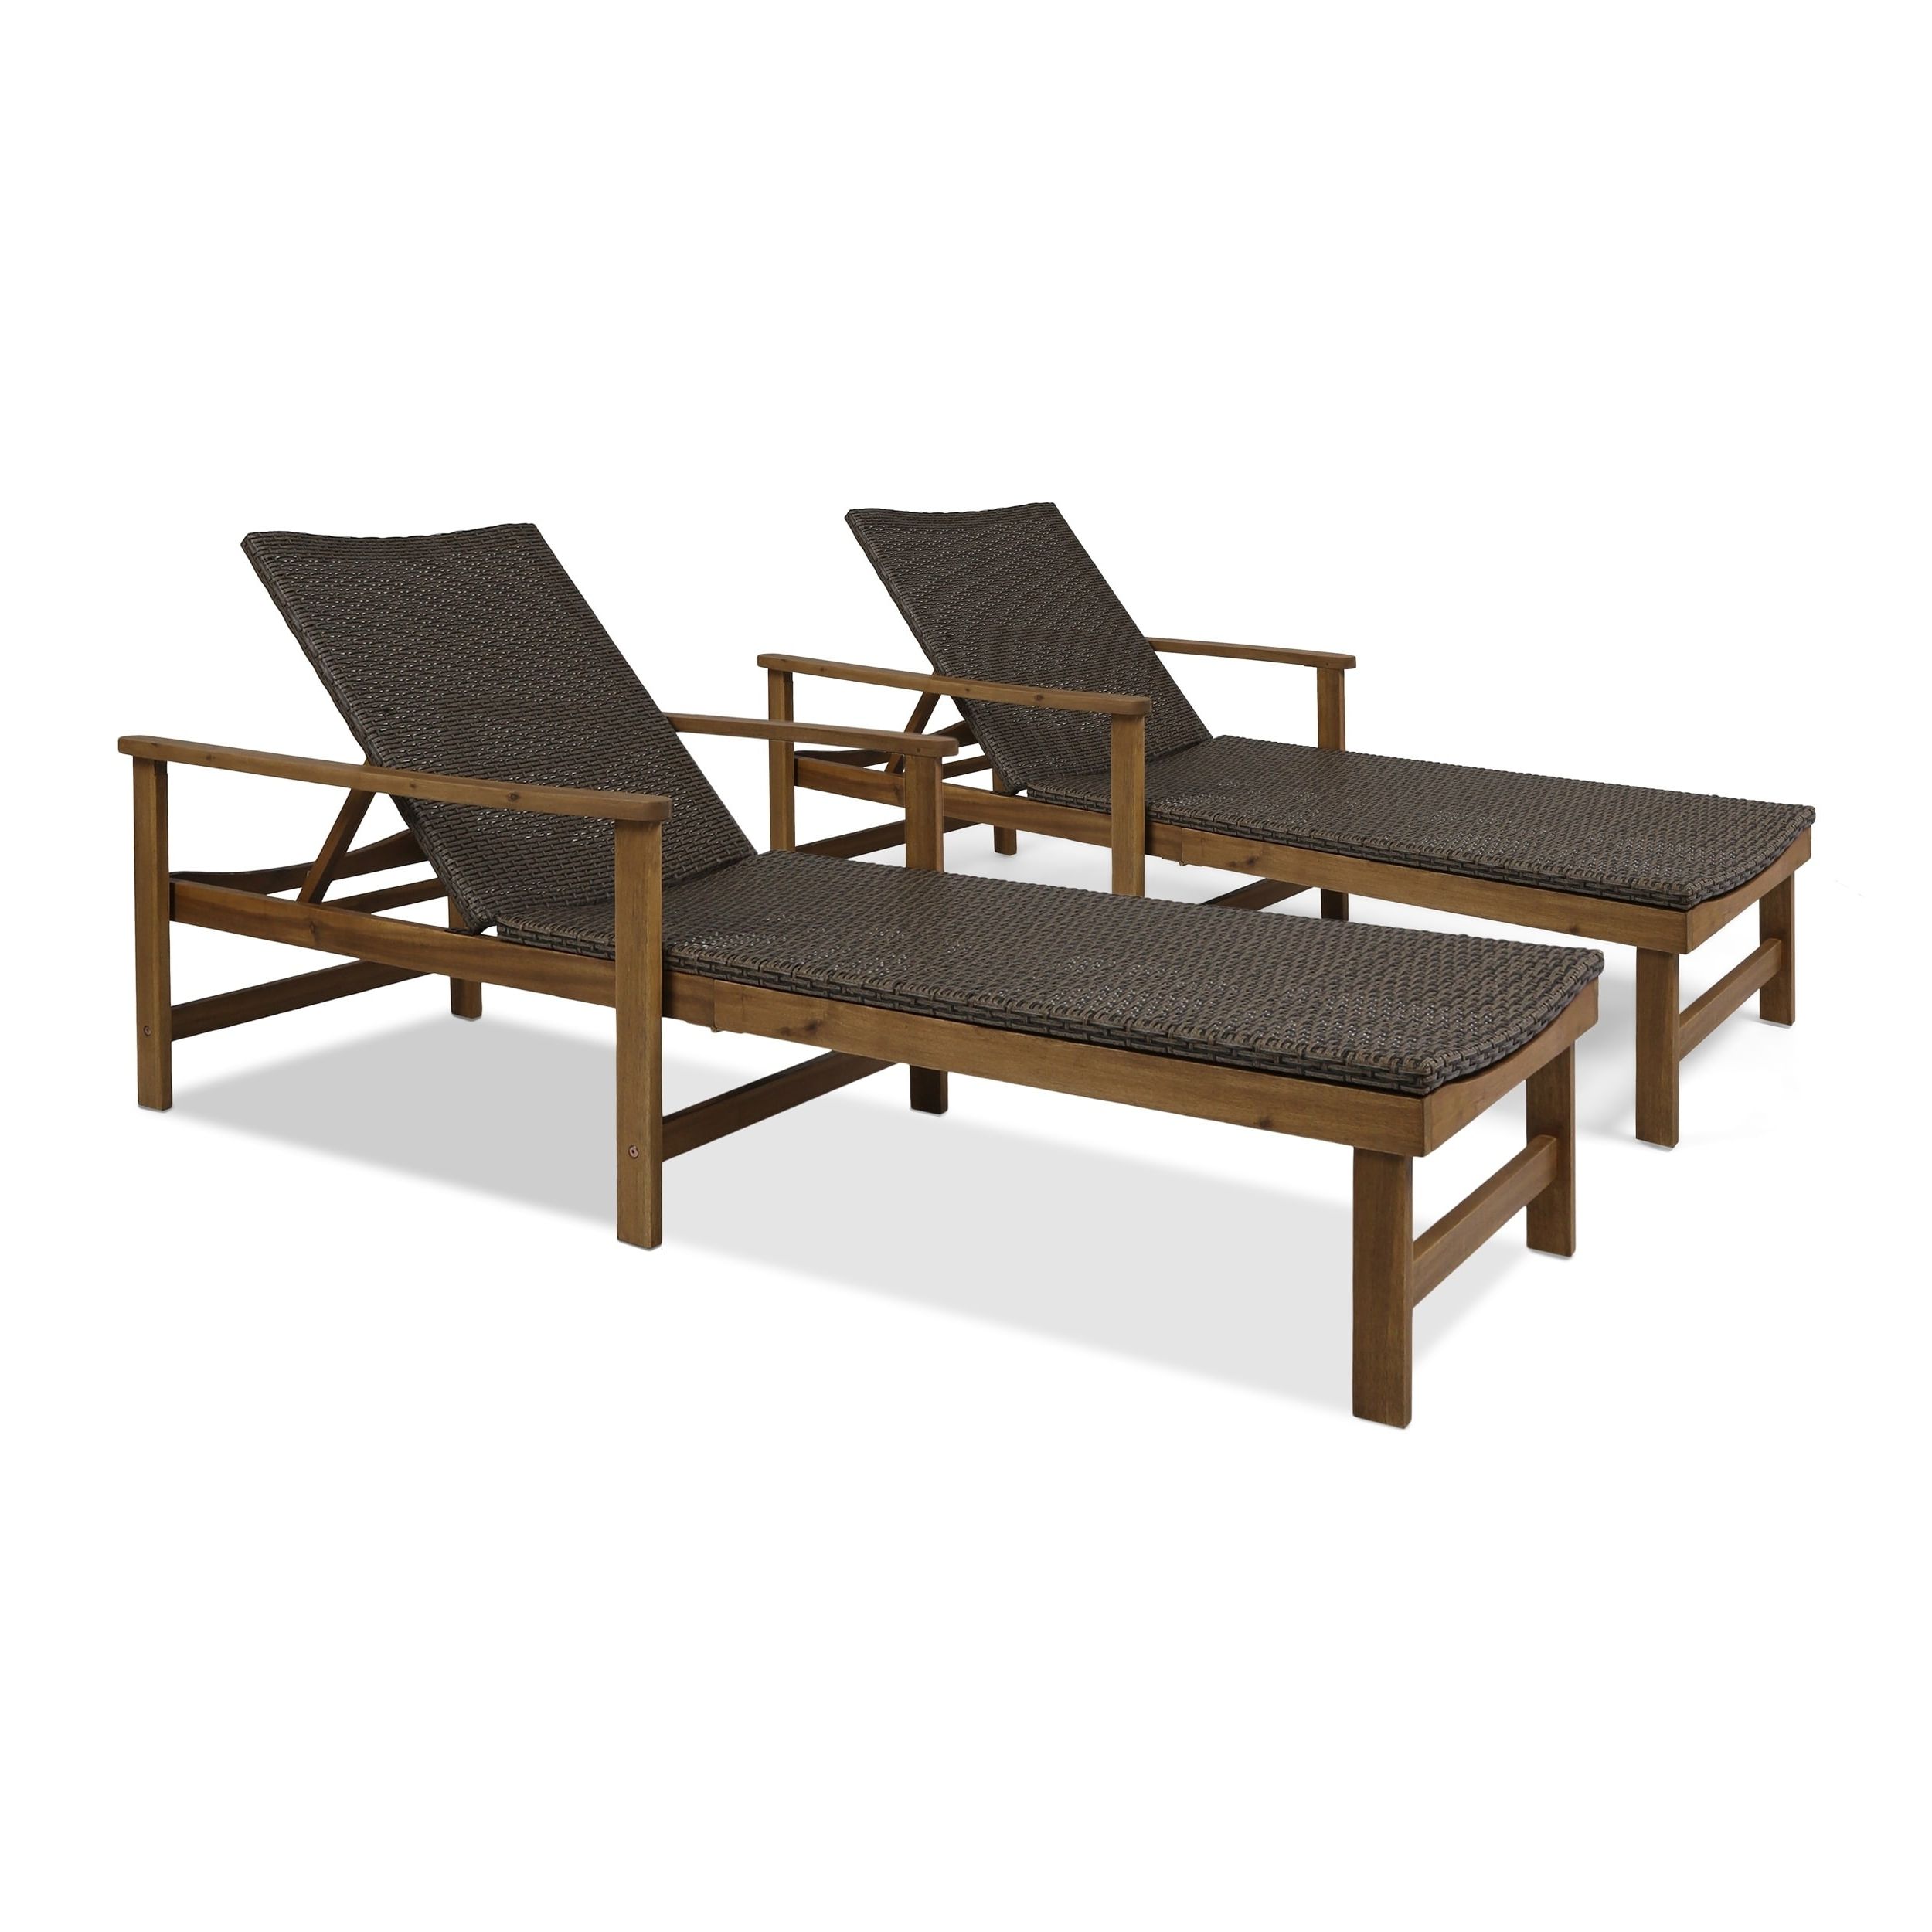 Christopher Knight Home Hampton Outdoor Chaise Lounges Acacia Wood And  Wicker (set Of 2) By Pertaining To Newest Hampton Outdoor Chaise Lounges Acacia Wood And Wicker (View 5 of 25)